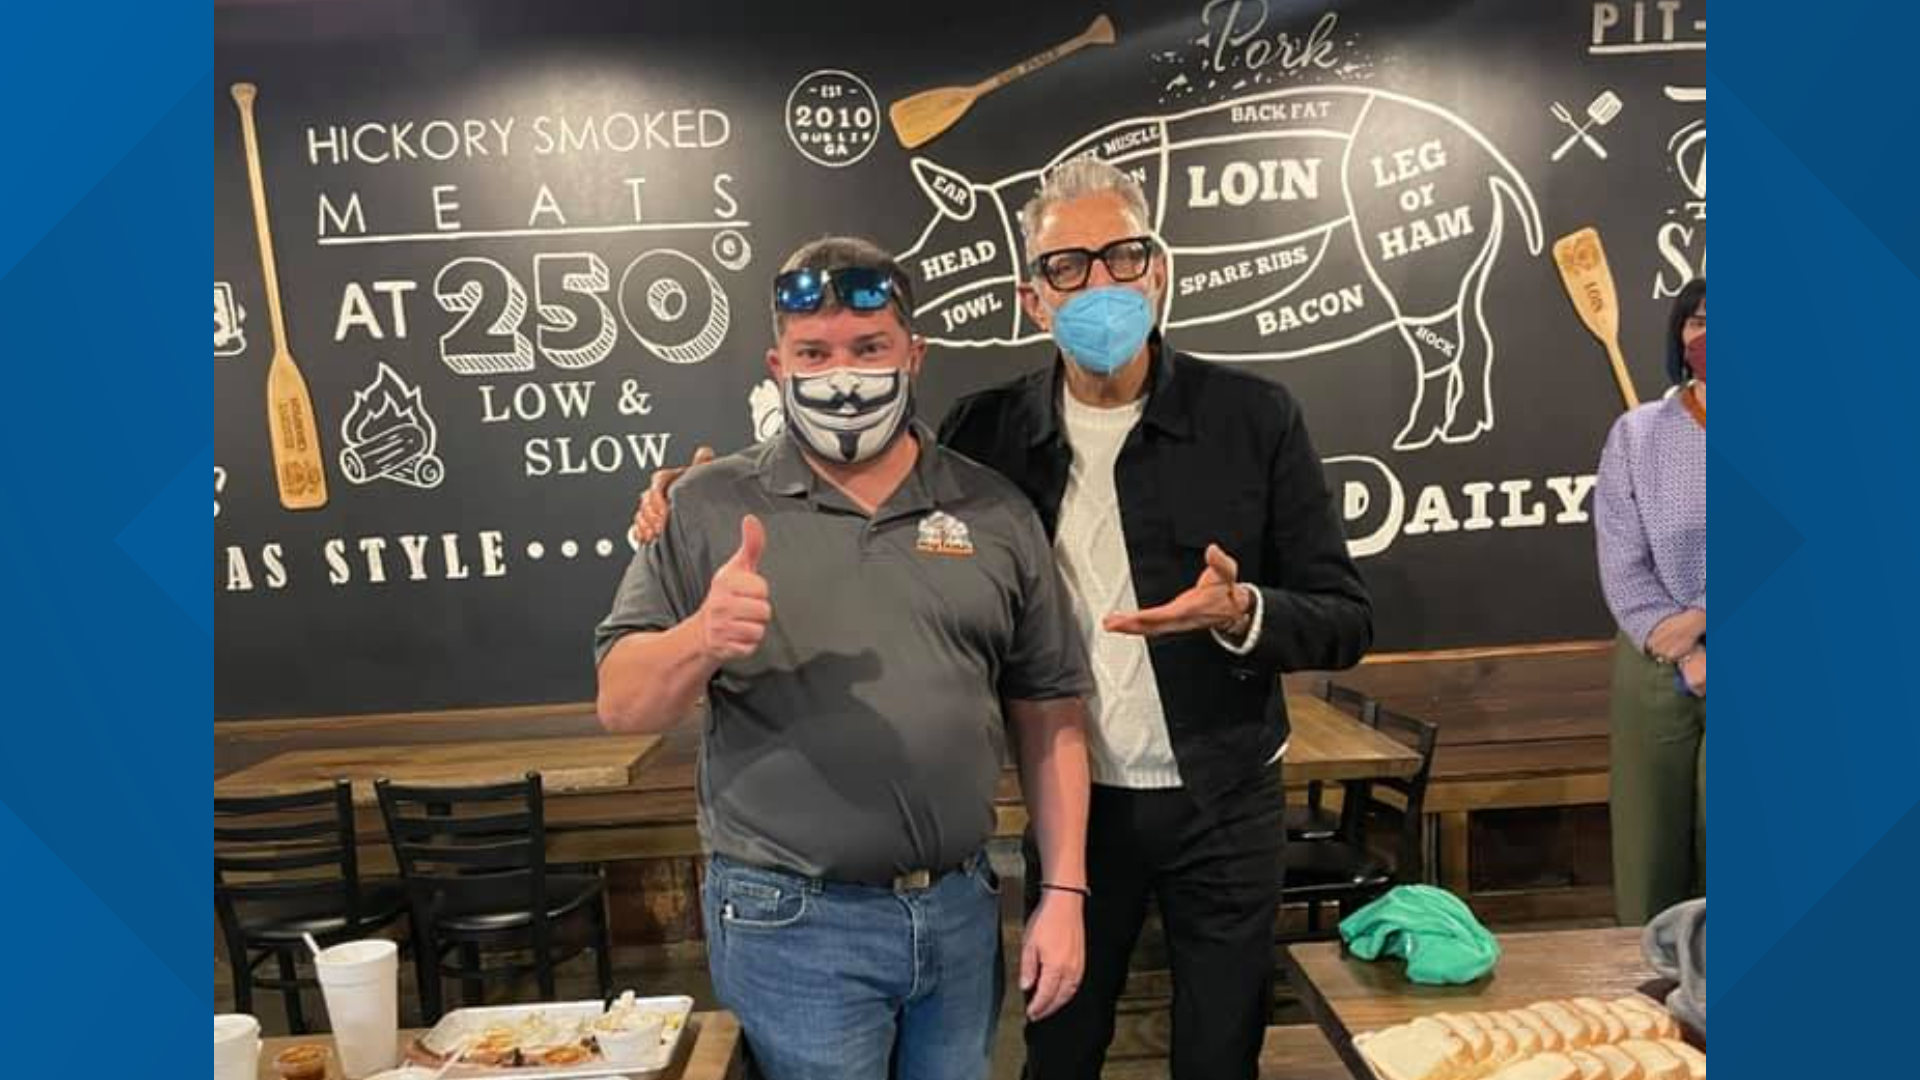 The owner of Holy Smokes BBQ says they closed down their dining room for the special visitor and his crew